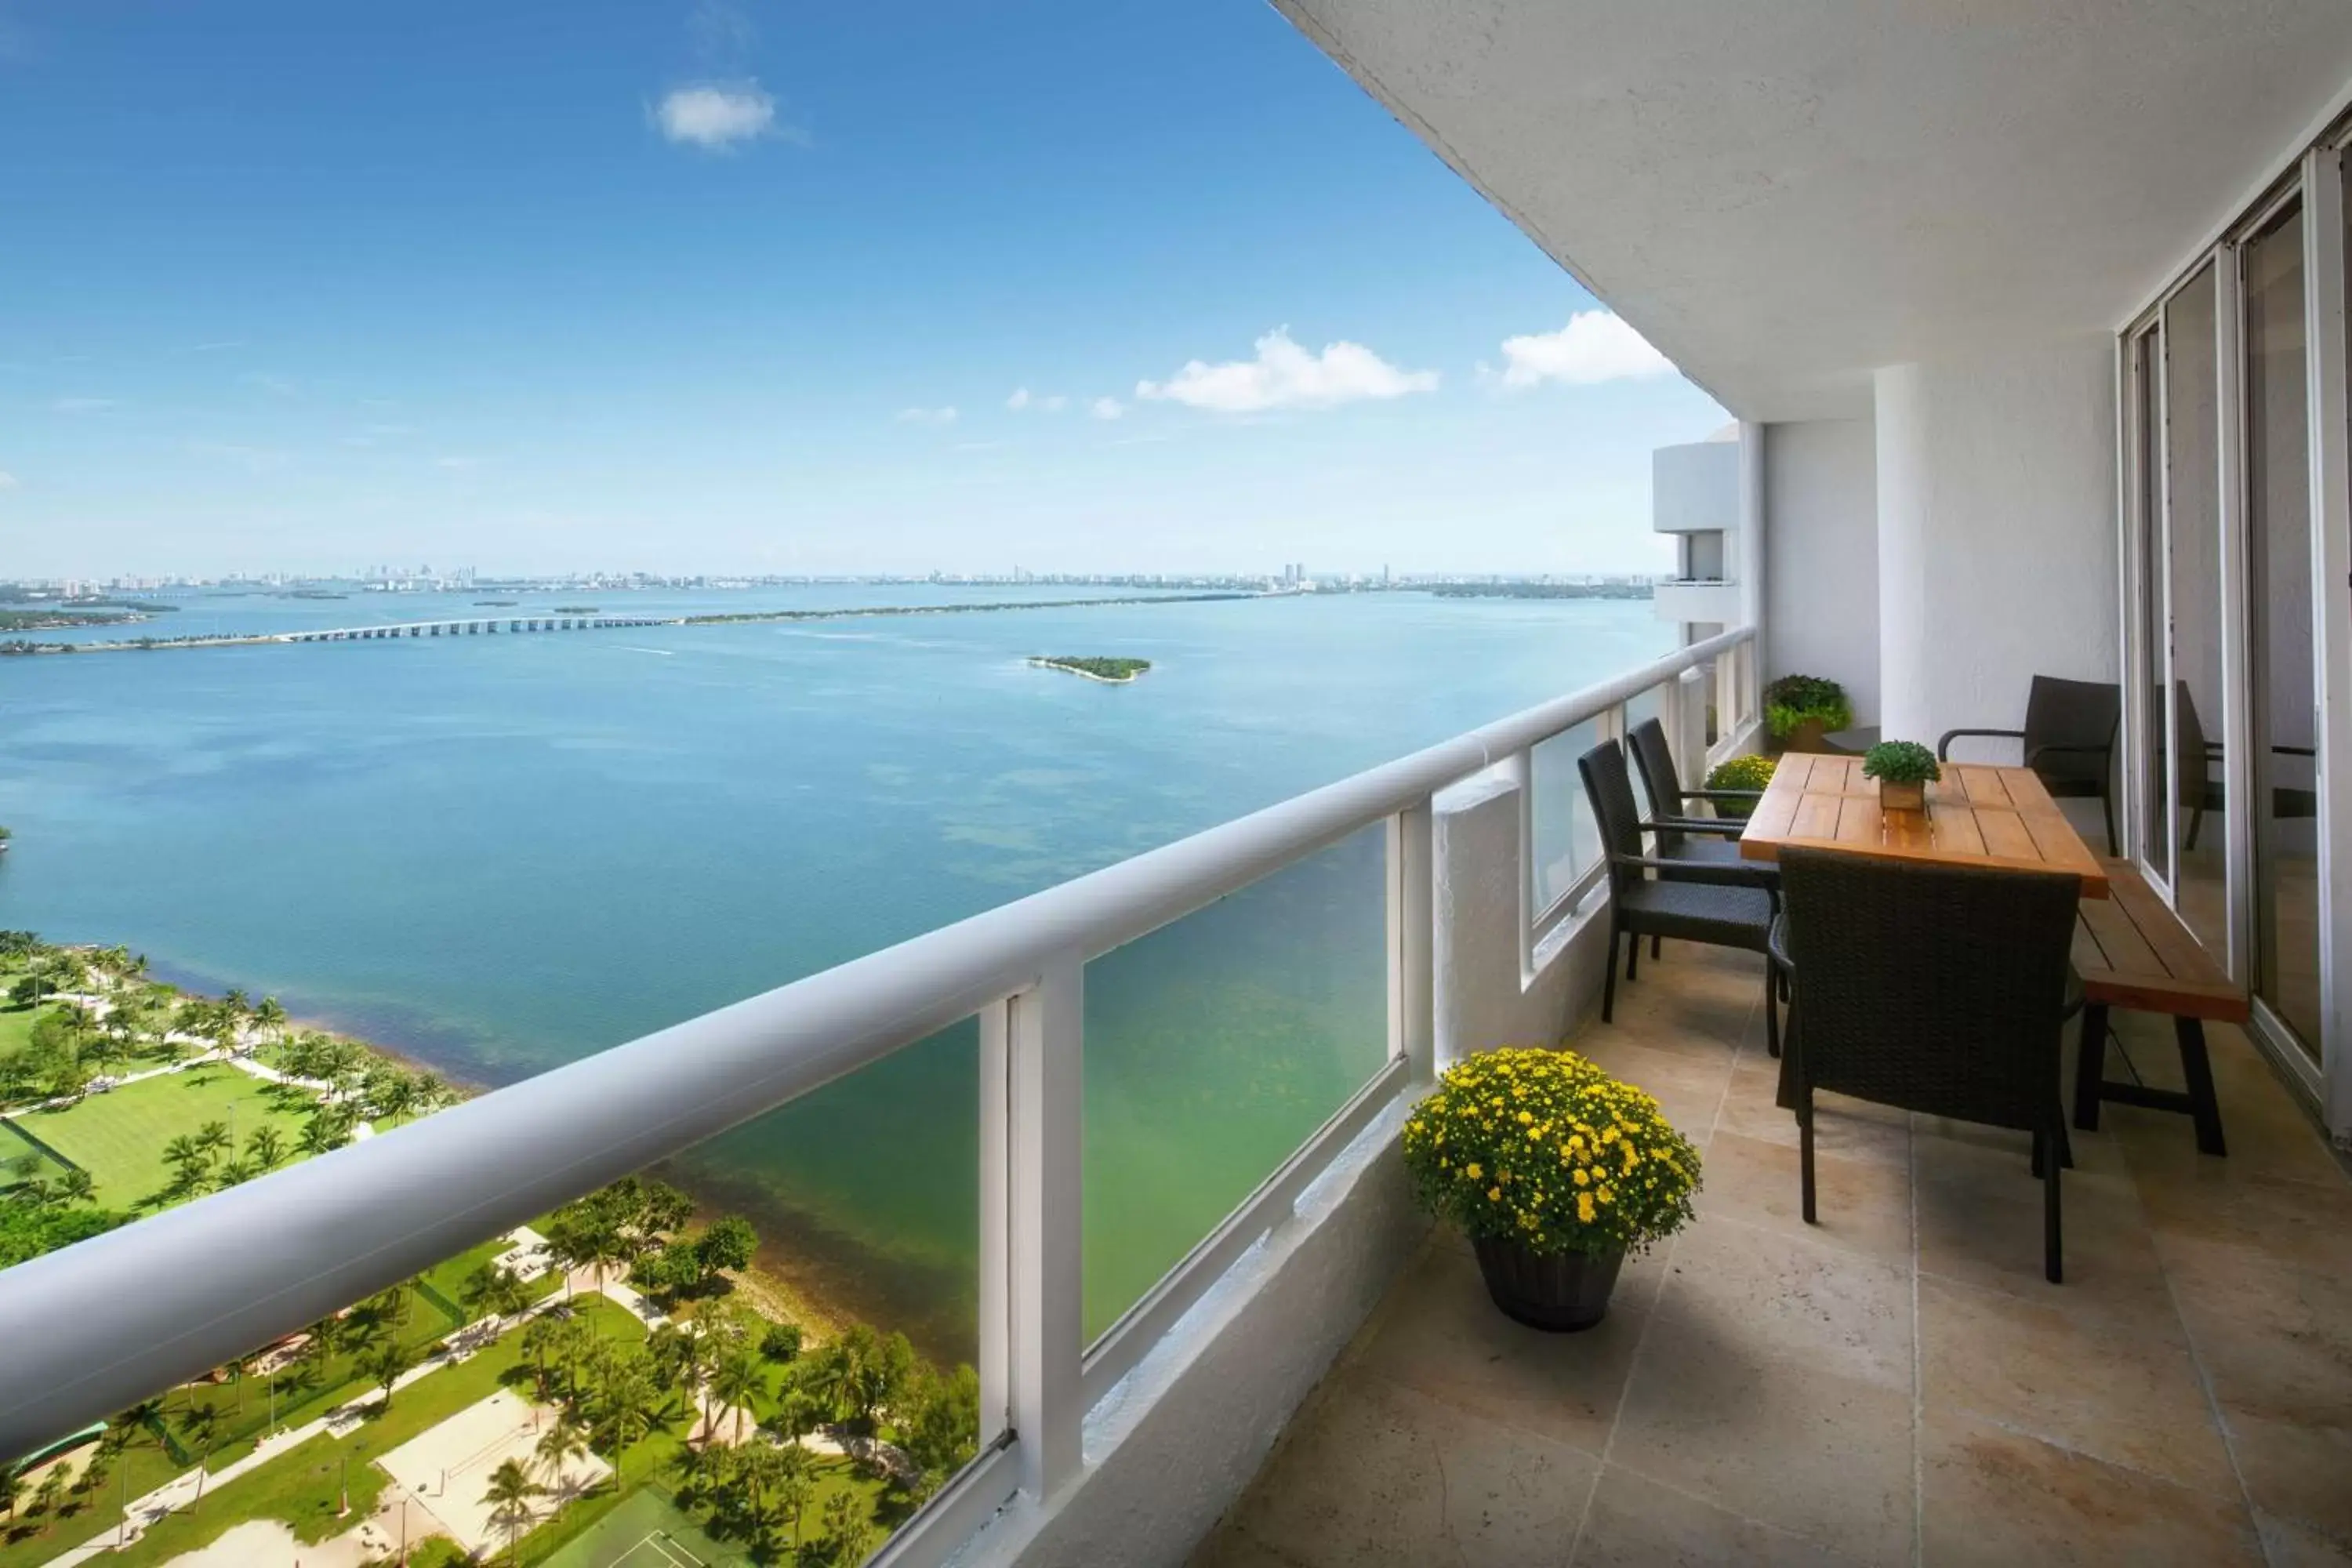 View (from property/room) in DoubleTree by Hilton Grand Hotel Biscayne Bay